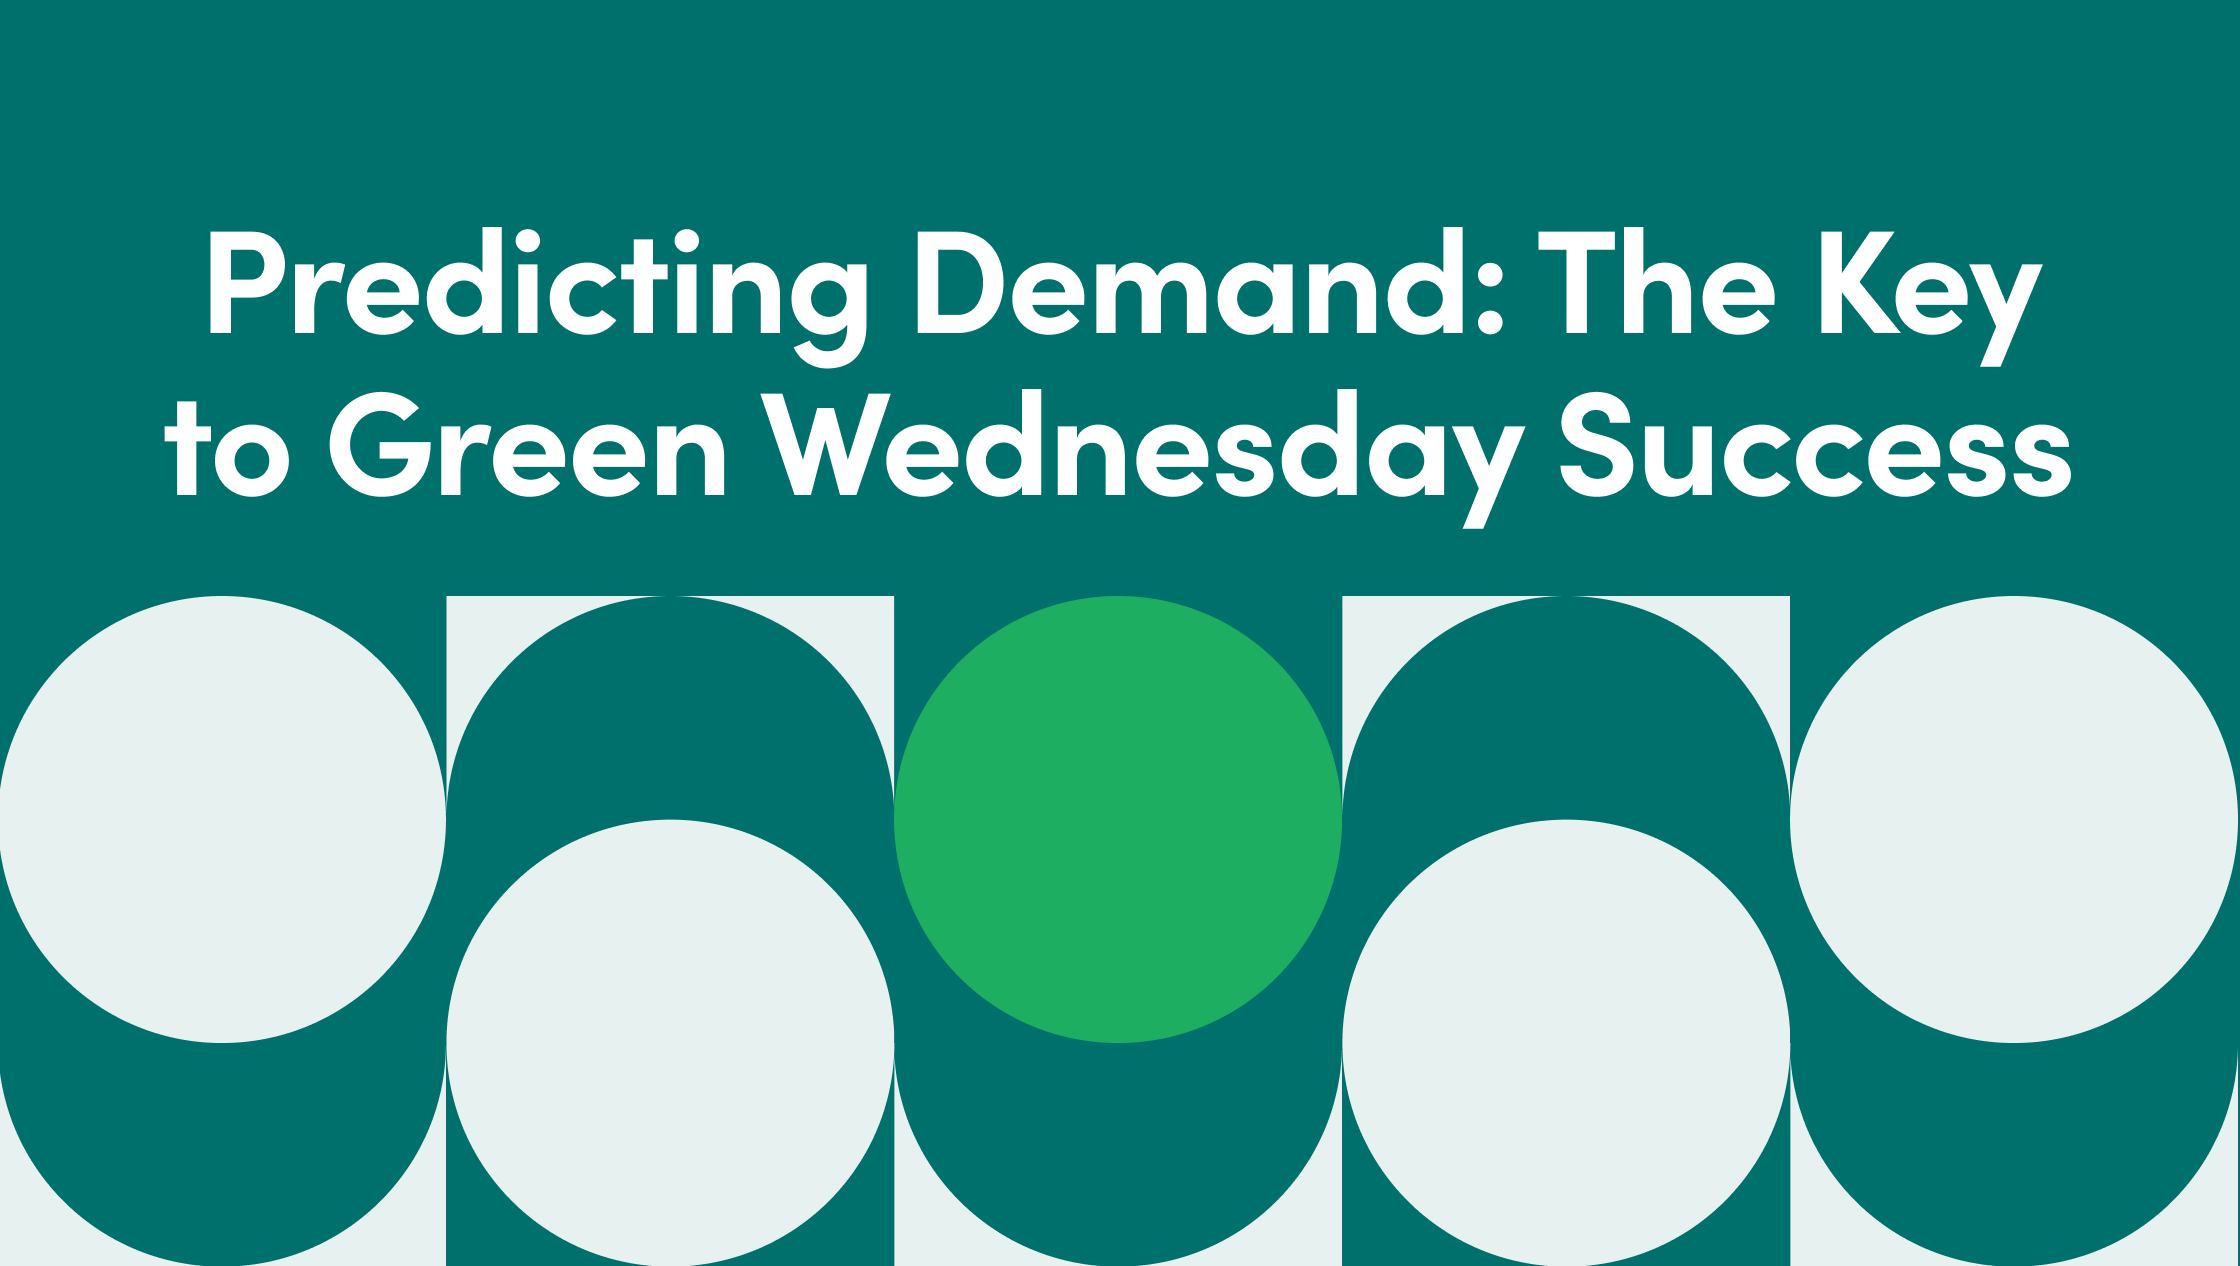 Predicting Demand: The Key to Green Wednesday Success